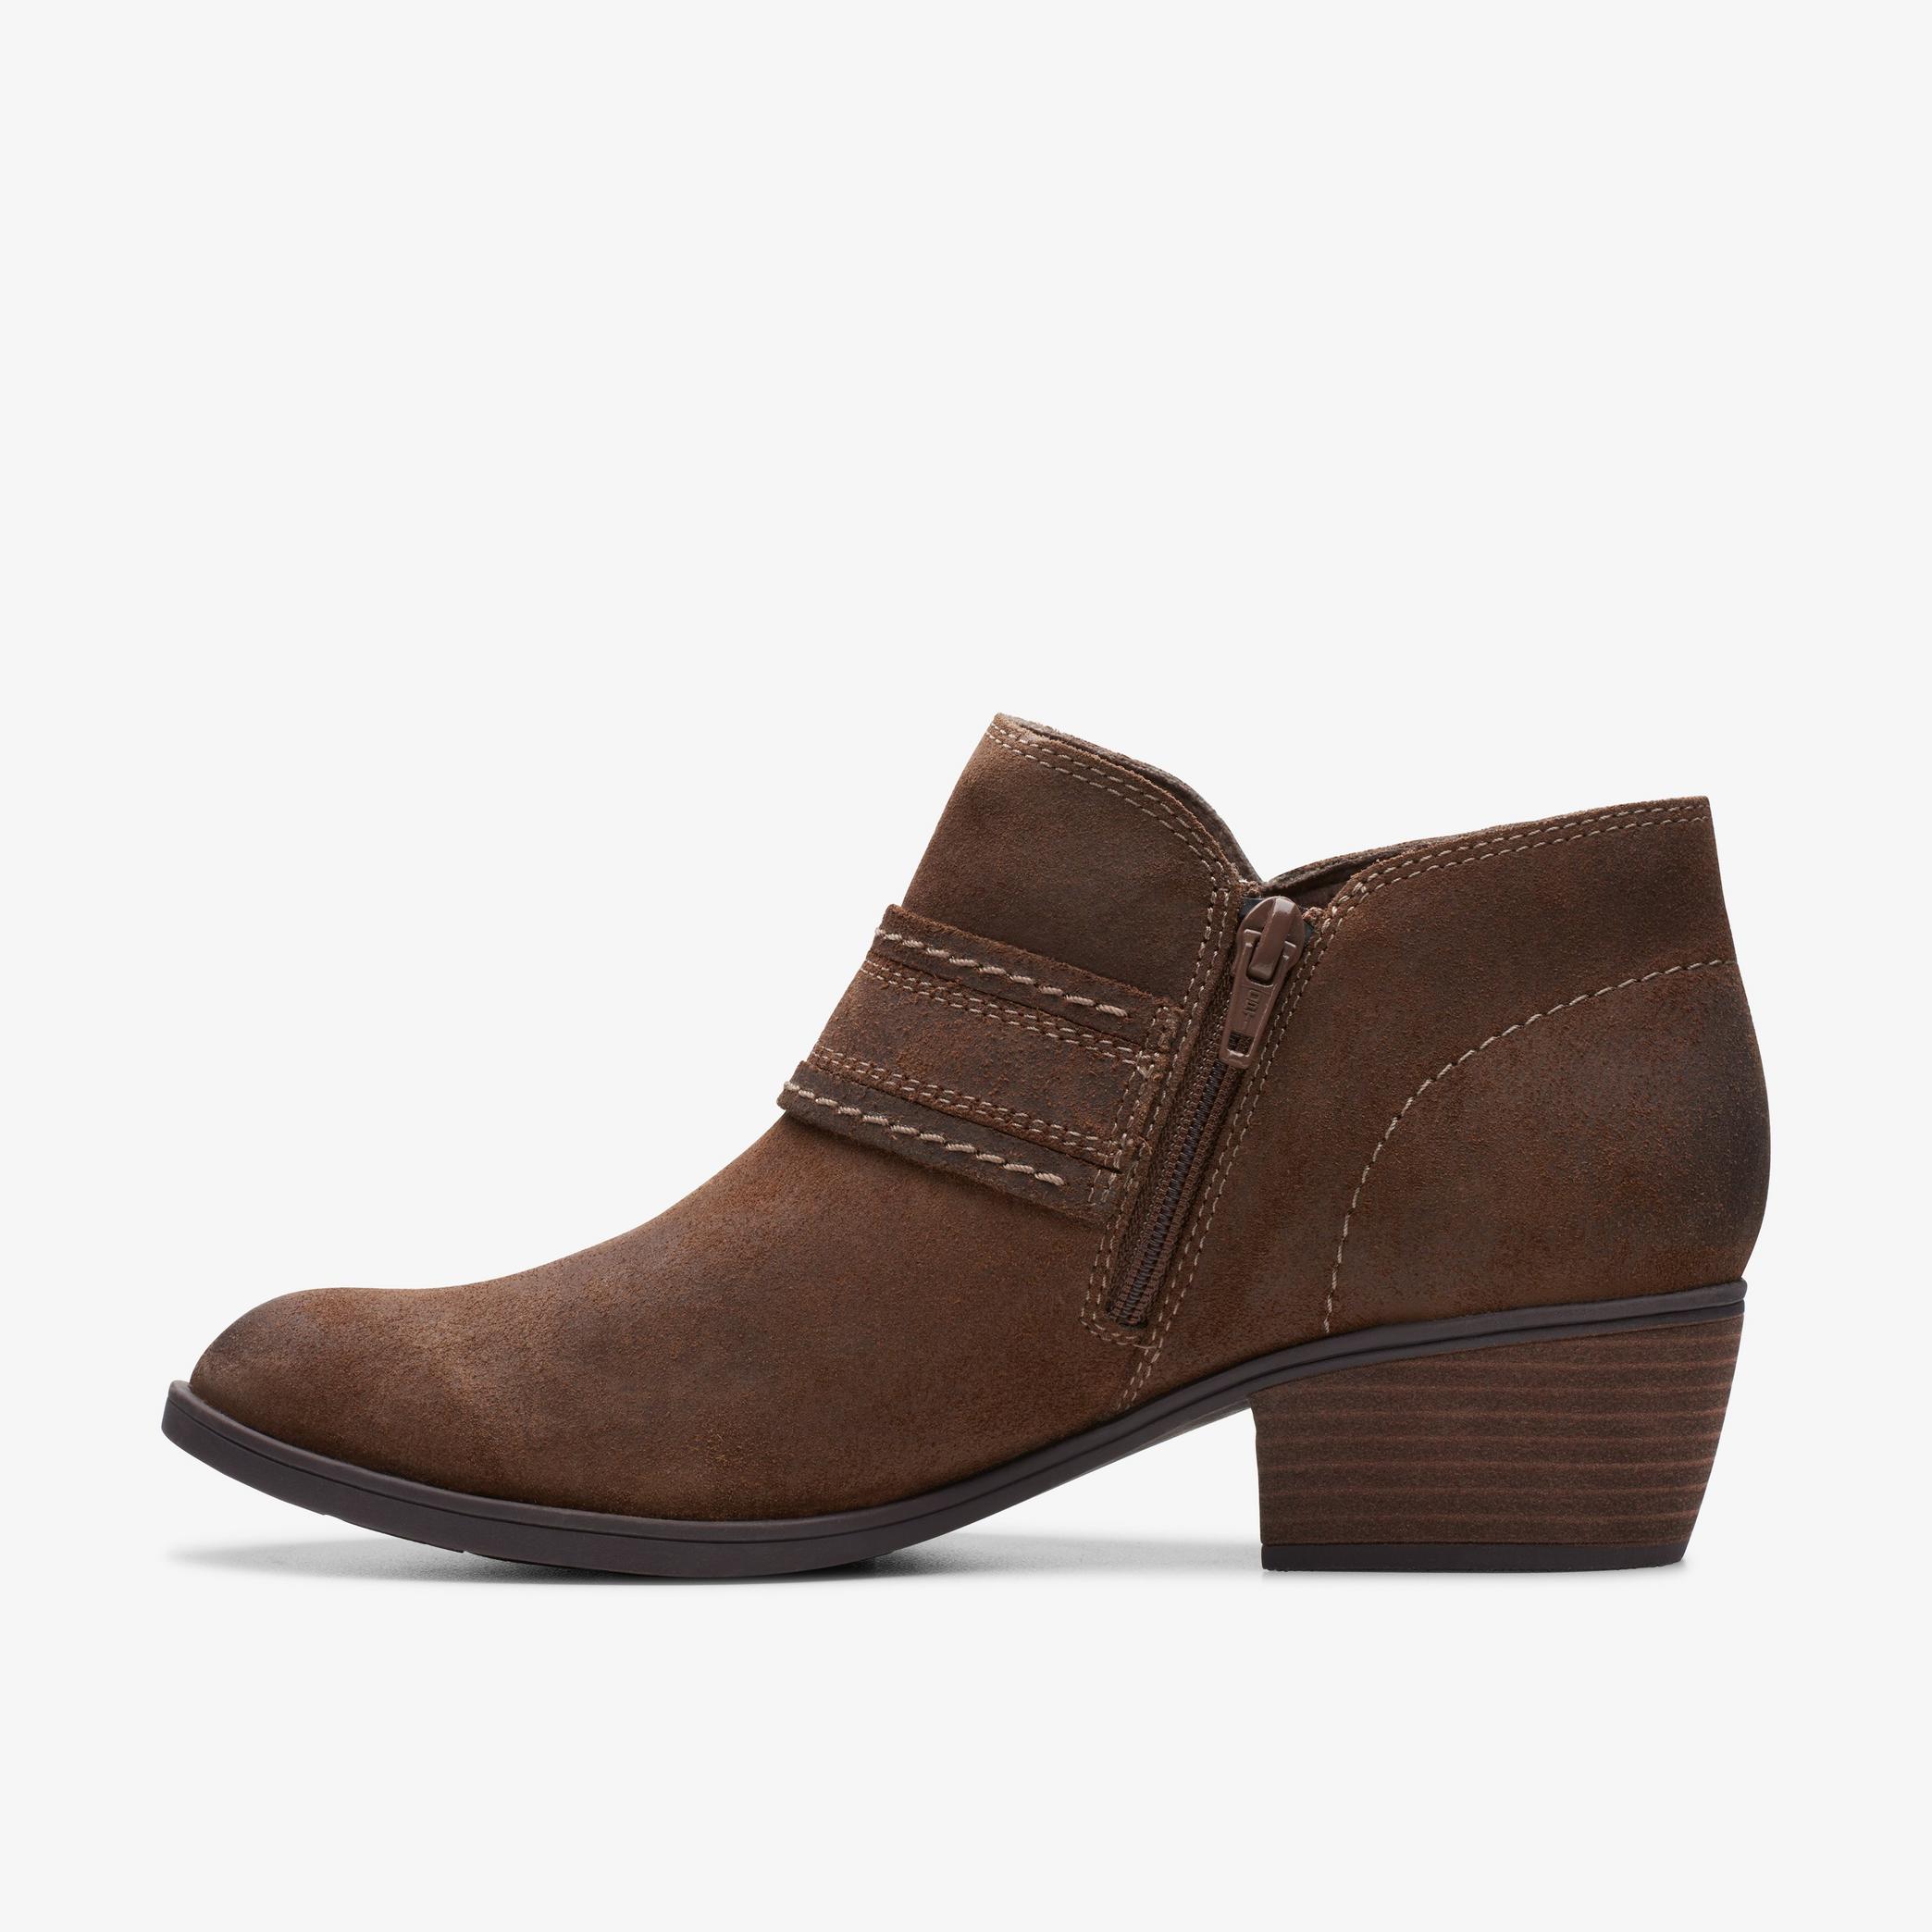 Charlten Bay Dark Tan Suede Ankle Boots, view 2 of 6